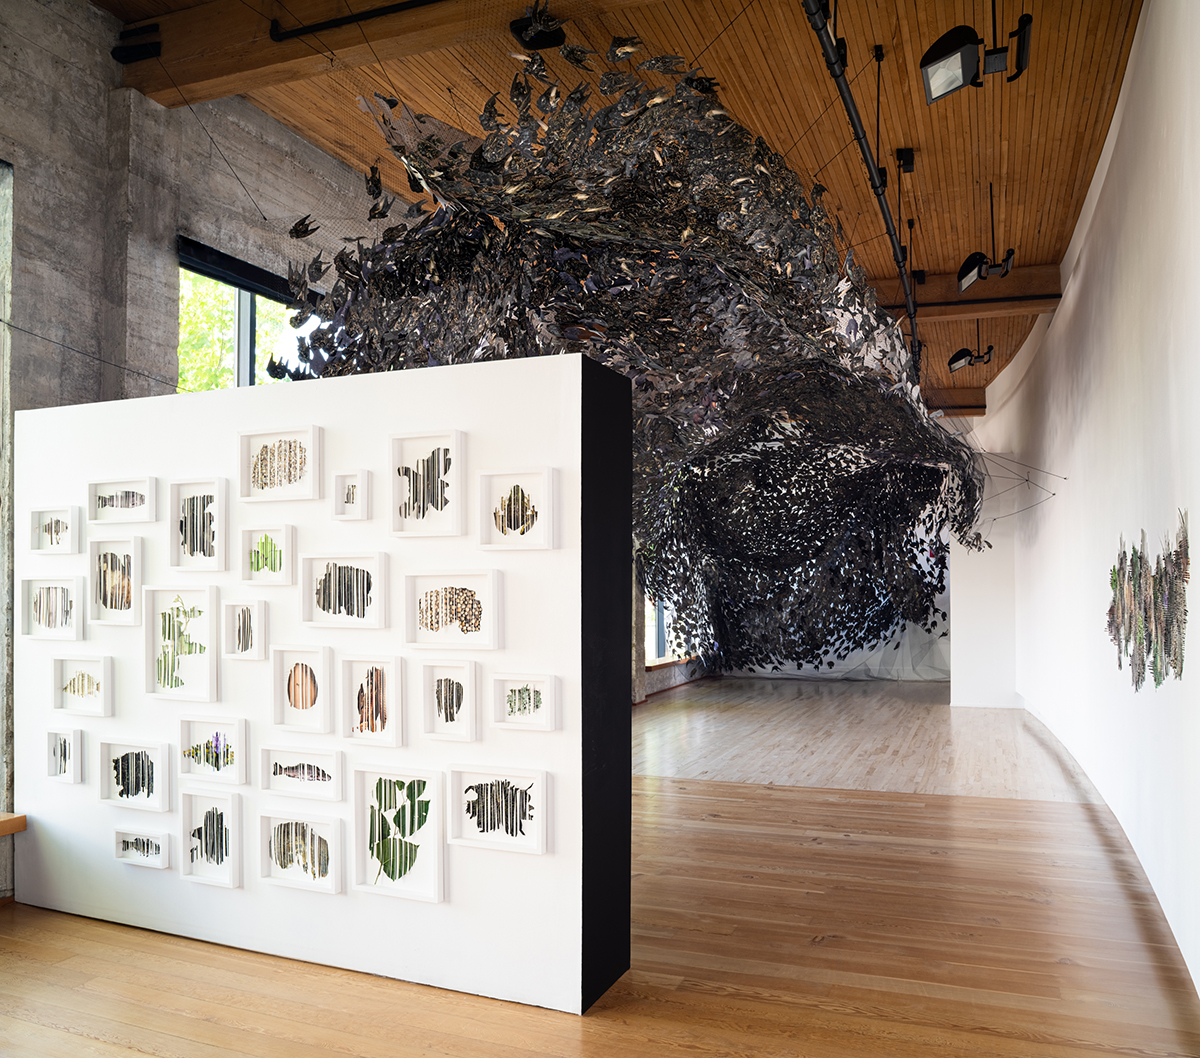 Image of an exhibition of installation art and works on paper by Markel Uriu, installed at Hedreen Gallery